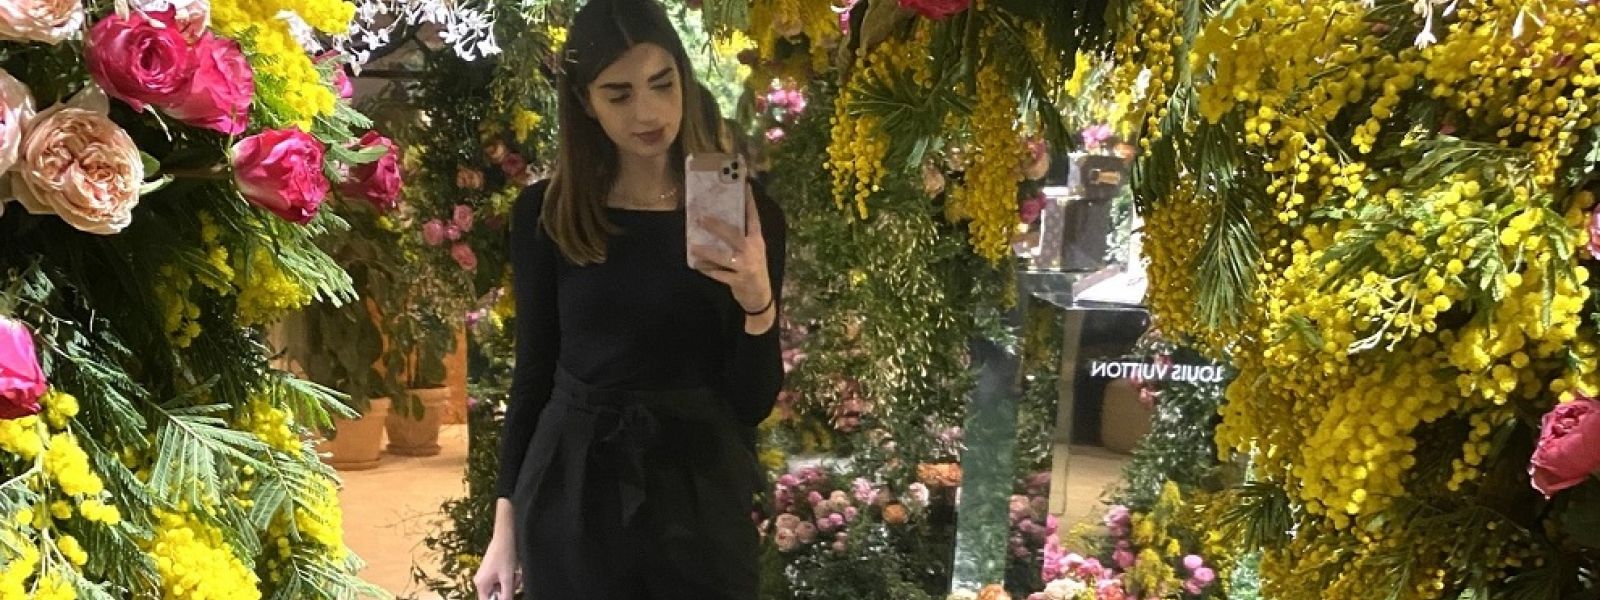 Young woman taking selfie with flowers behind her